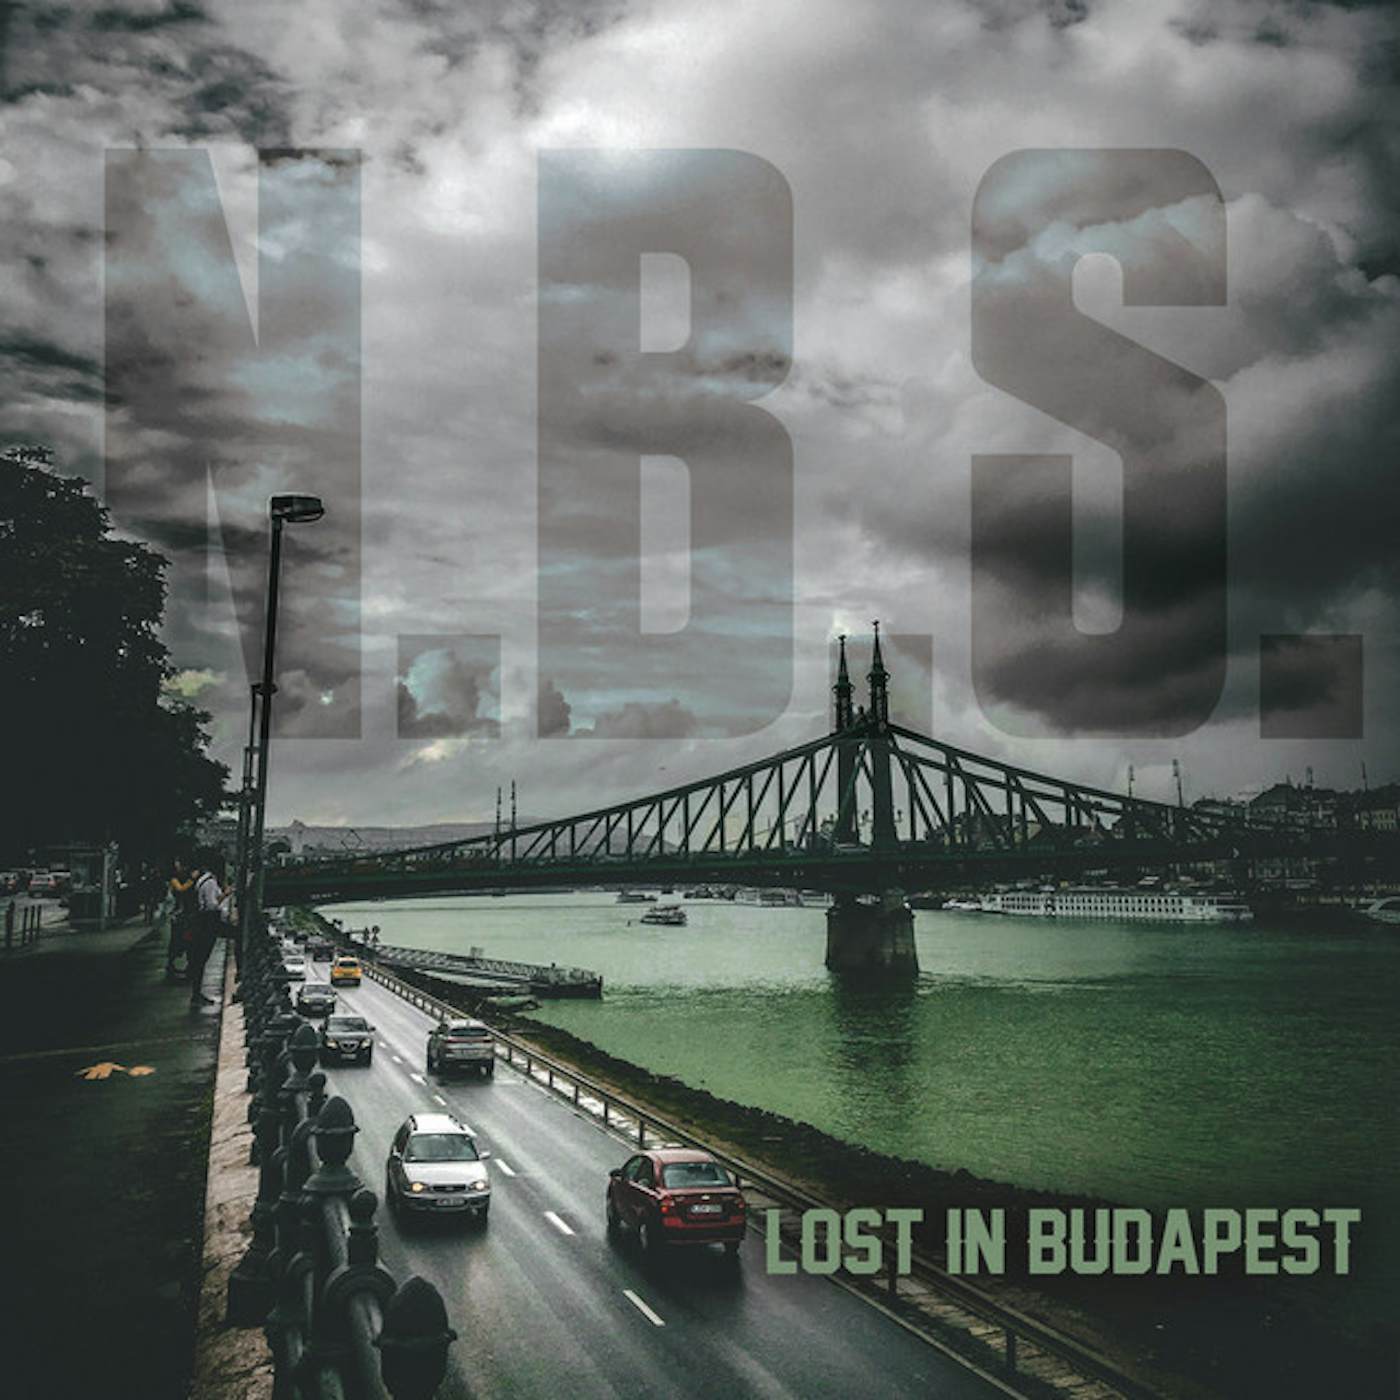 N ・S ・B LOST IN BUDAPEST CD